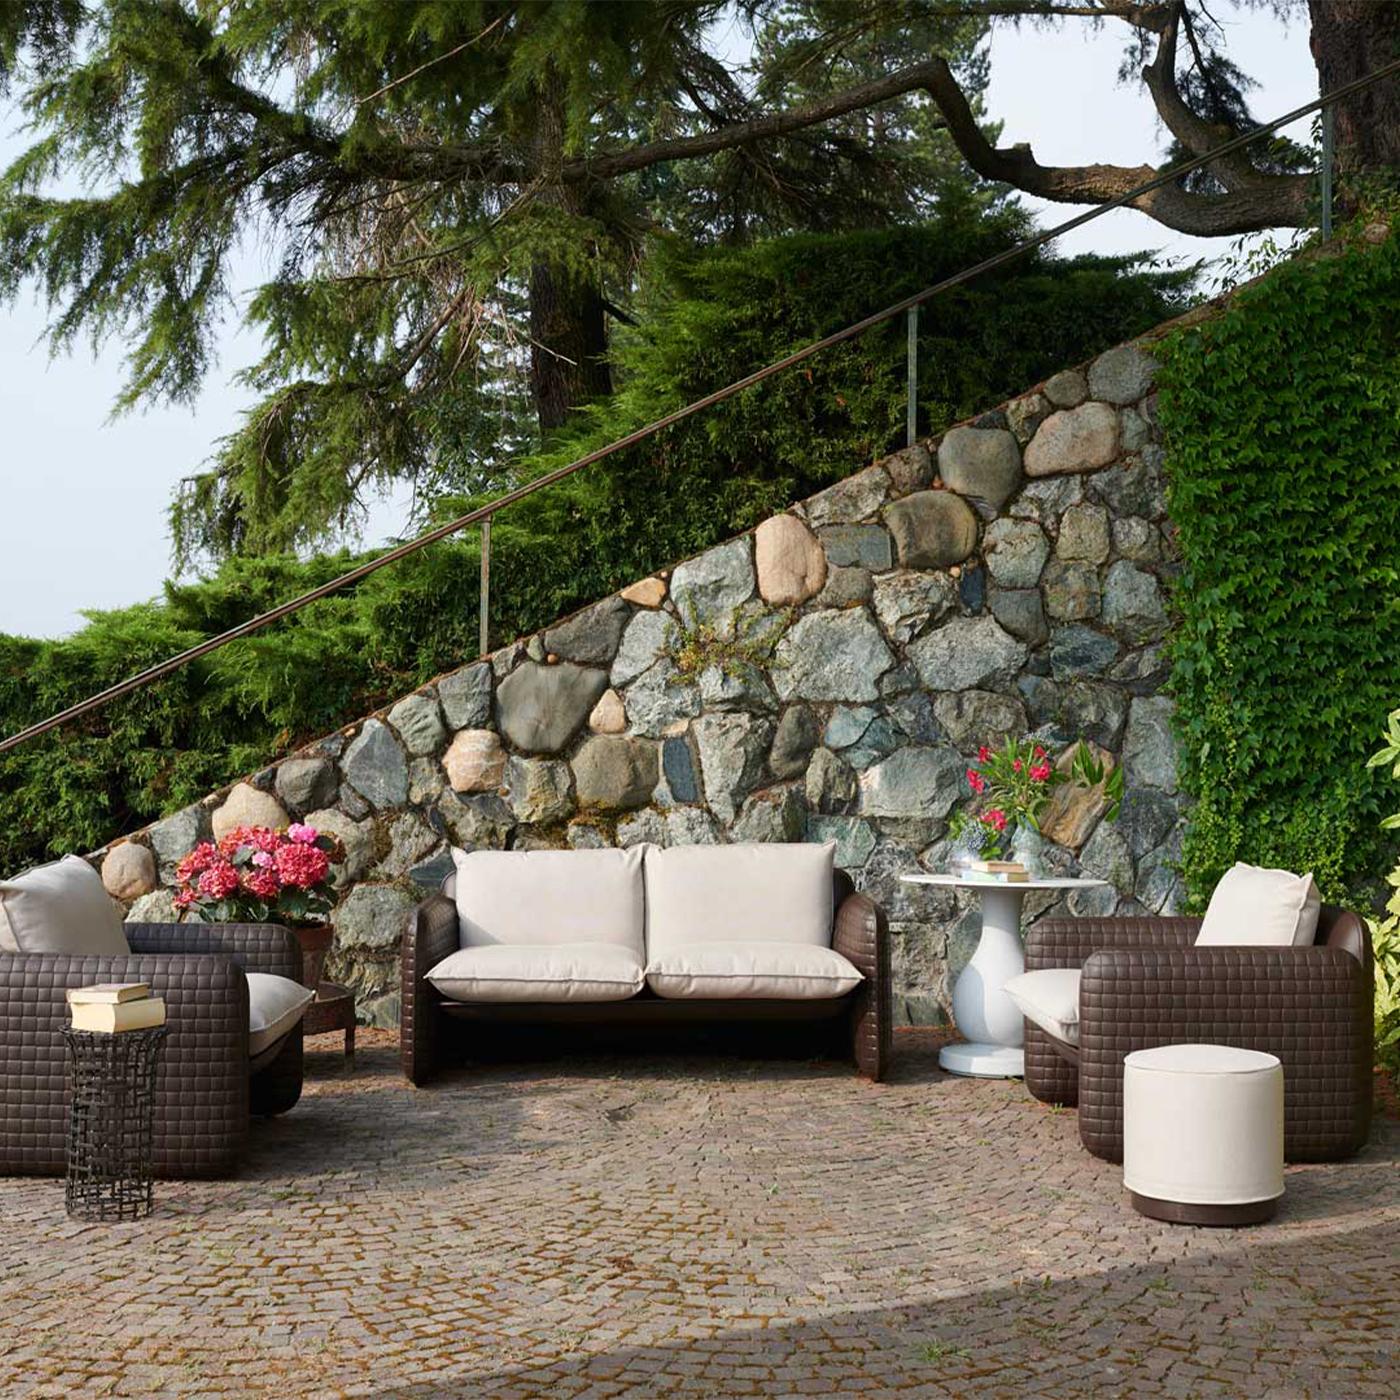 Mara sofa is a loveseat designed by Lorenza Bozzoli. Its unique texture covers the whole body of the sofa and it is inspired by the crafts woven leather. The cushions give comfort to the guests and make Mara Sofa suitable for indoor and outdoor: the